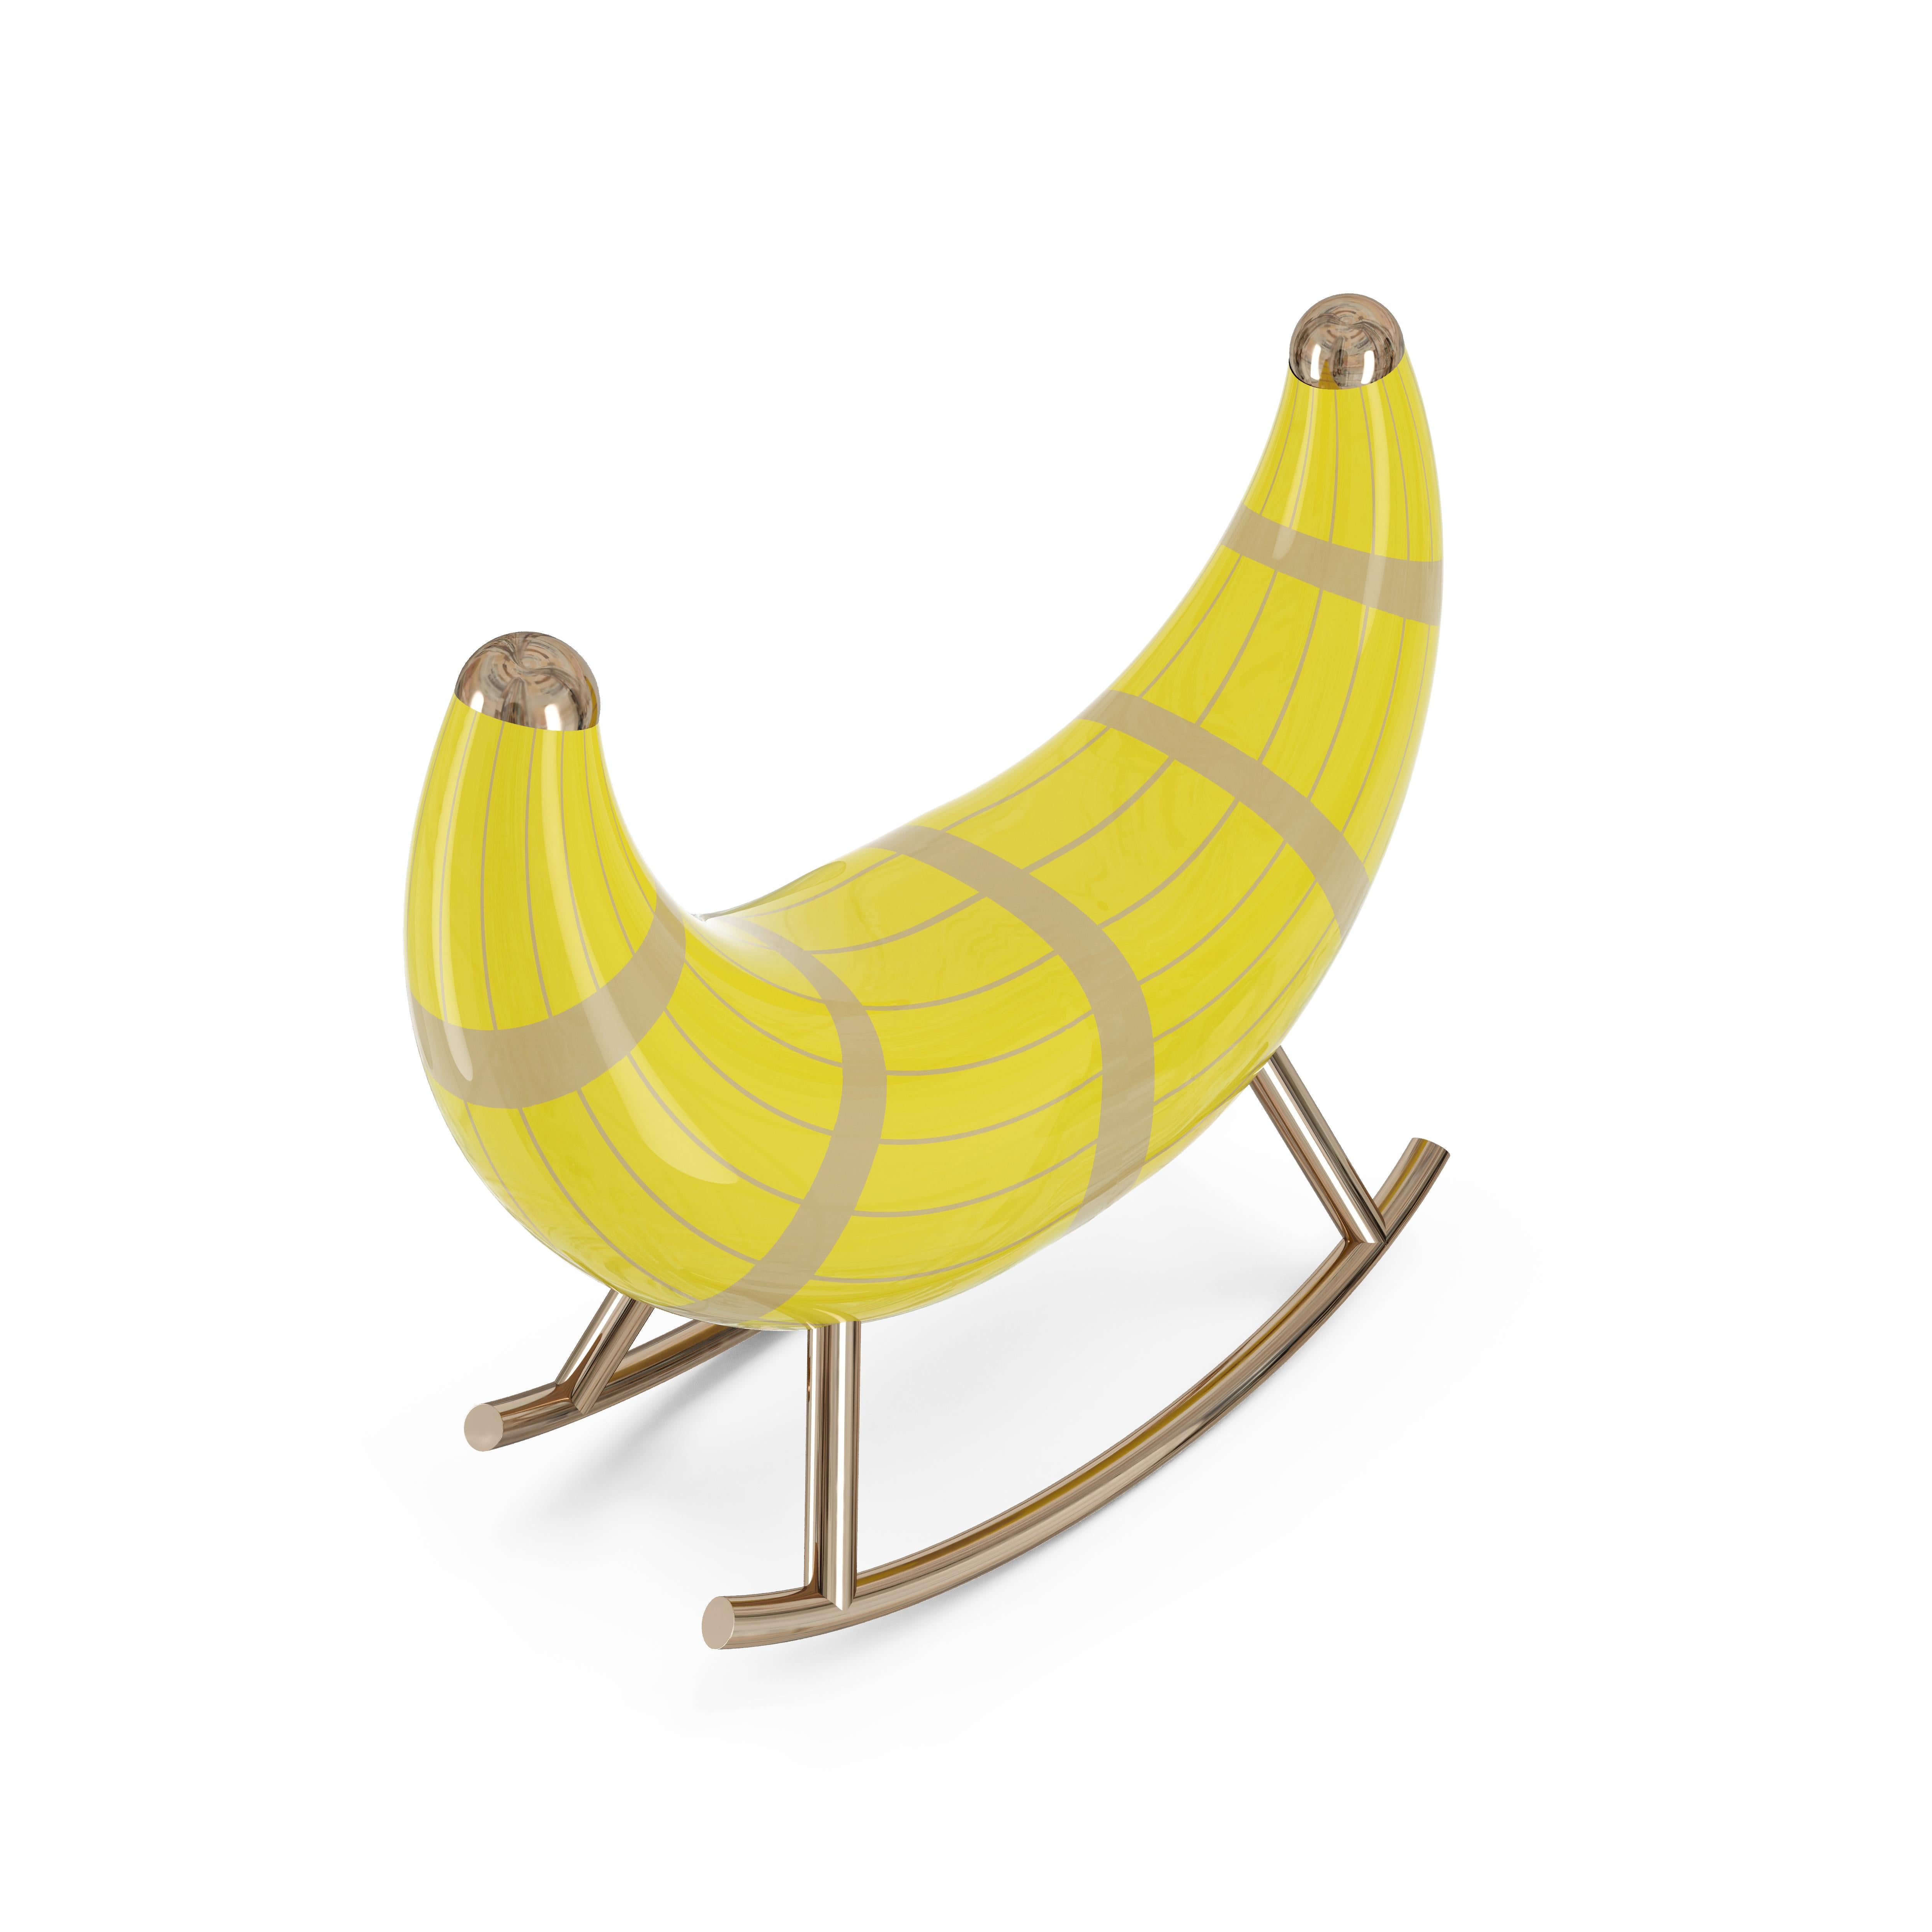 Nanook of the North Lime is an exquisite rocking seat with metal legs in gold. It is available in three colours.

As the name suggests, the Scarlet Splendour Gelato Collection brings you comforting familiarity and joyful adventure through each